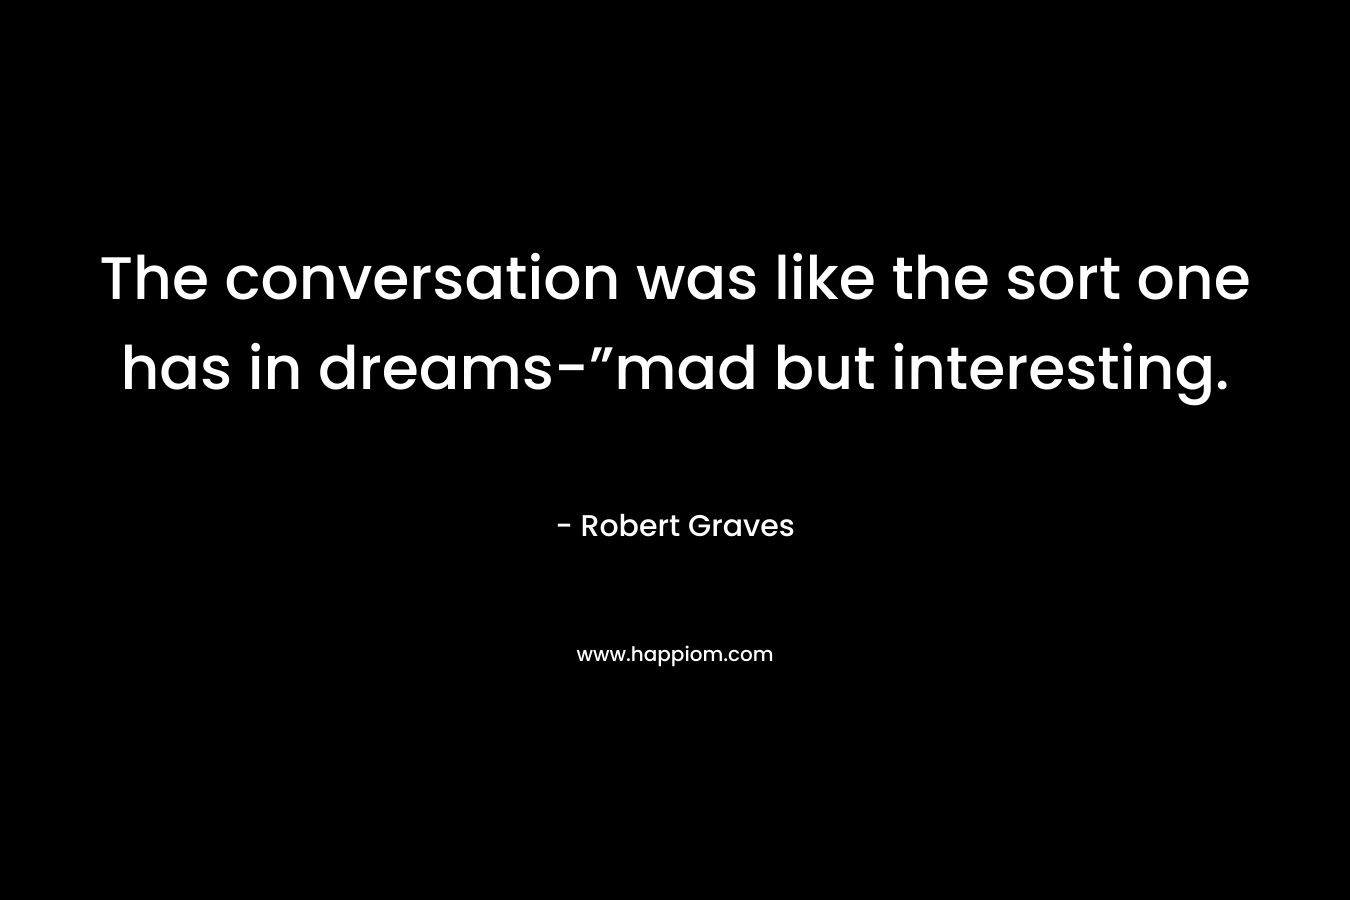 The conversation was like the sort one has in dreams-”mad but interesting. – Robert Graves